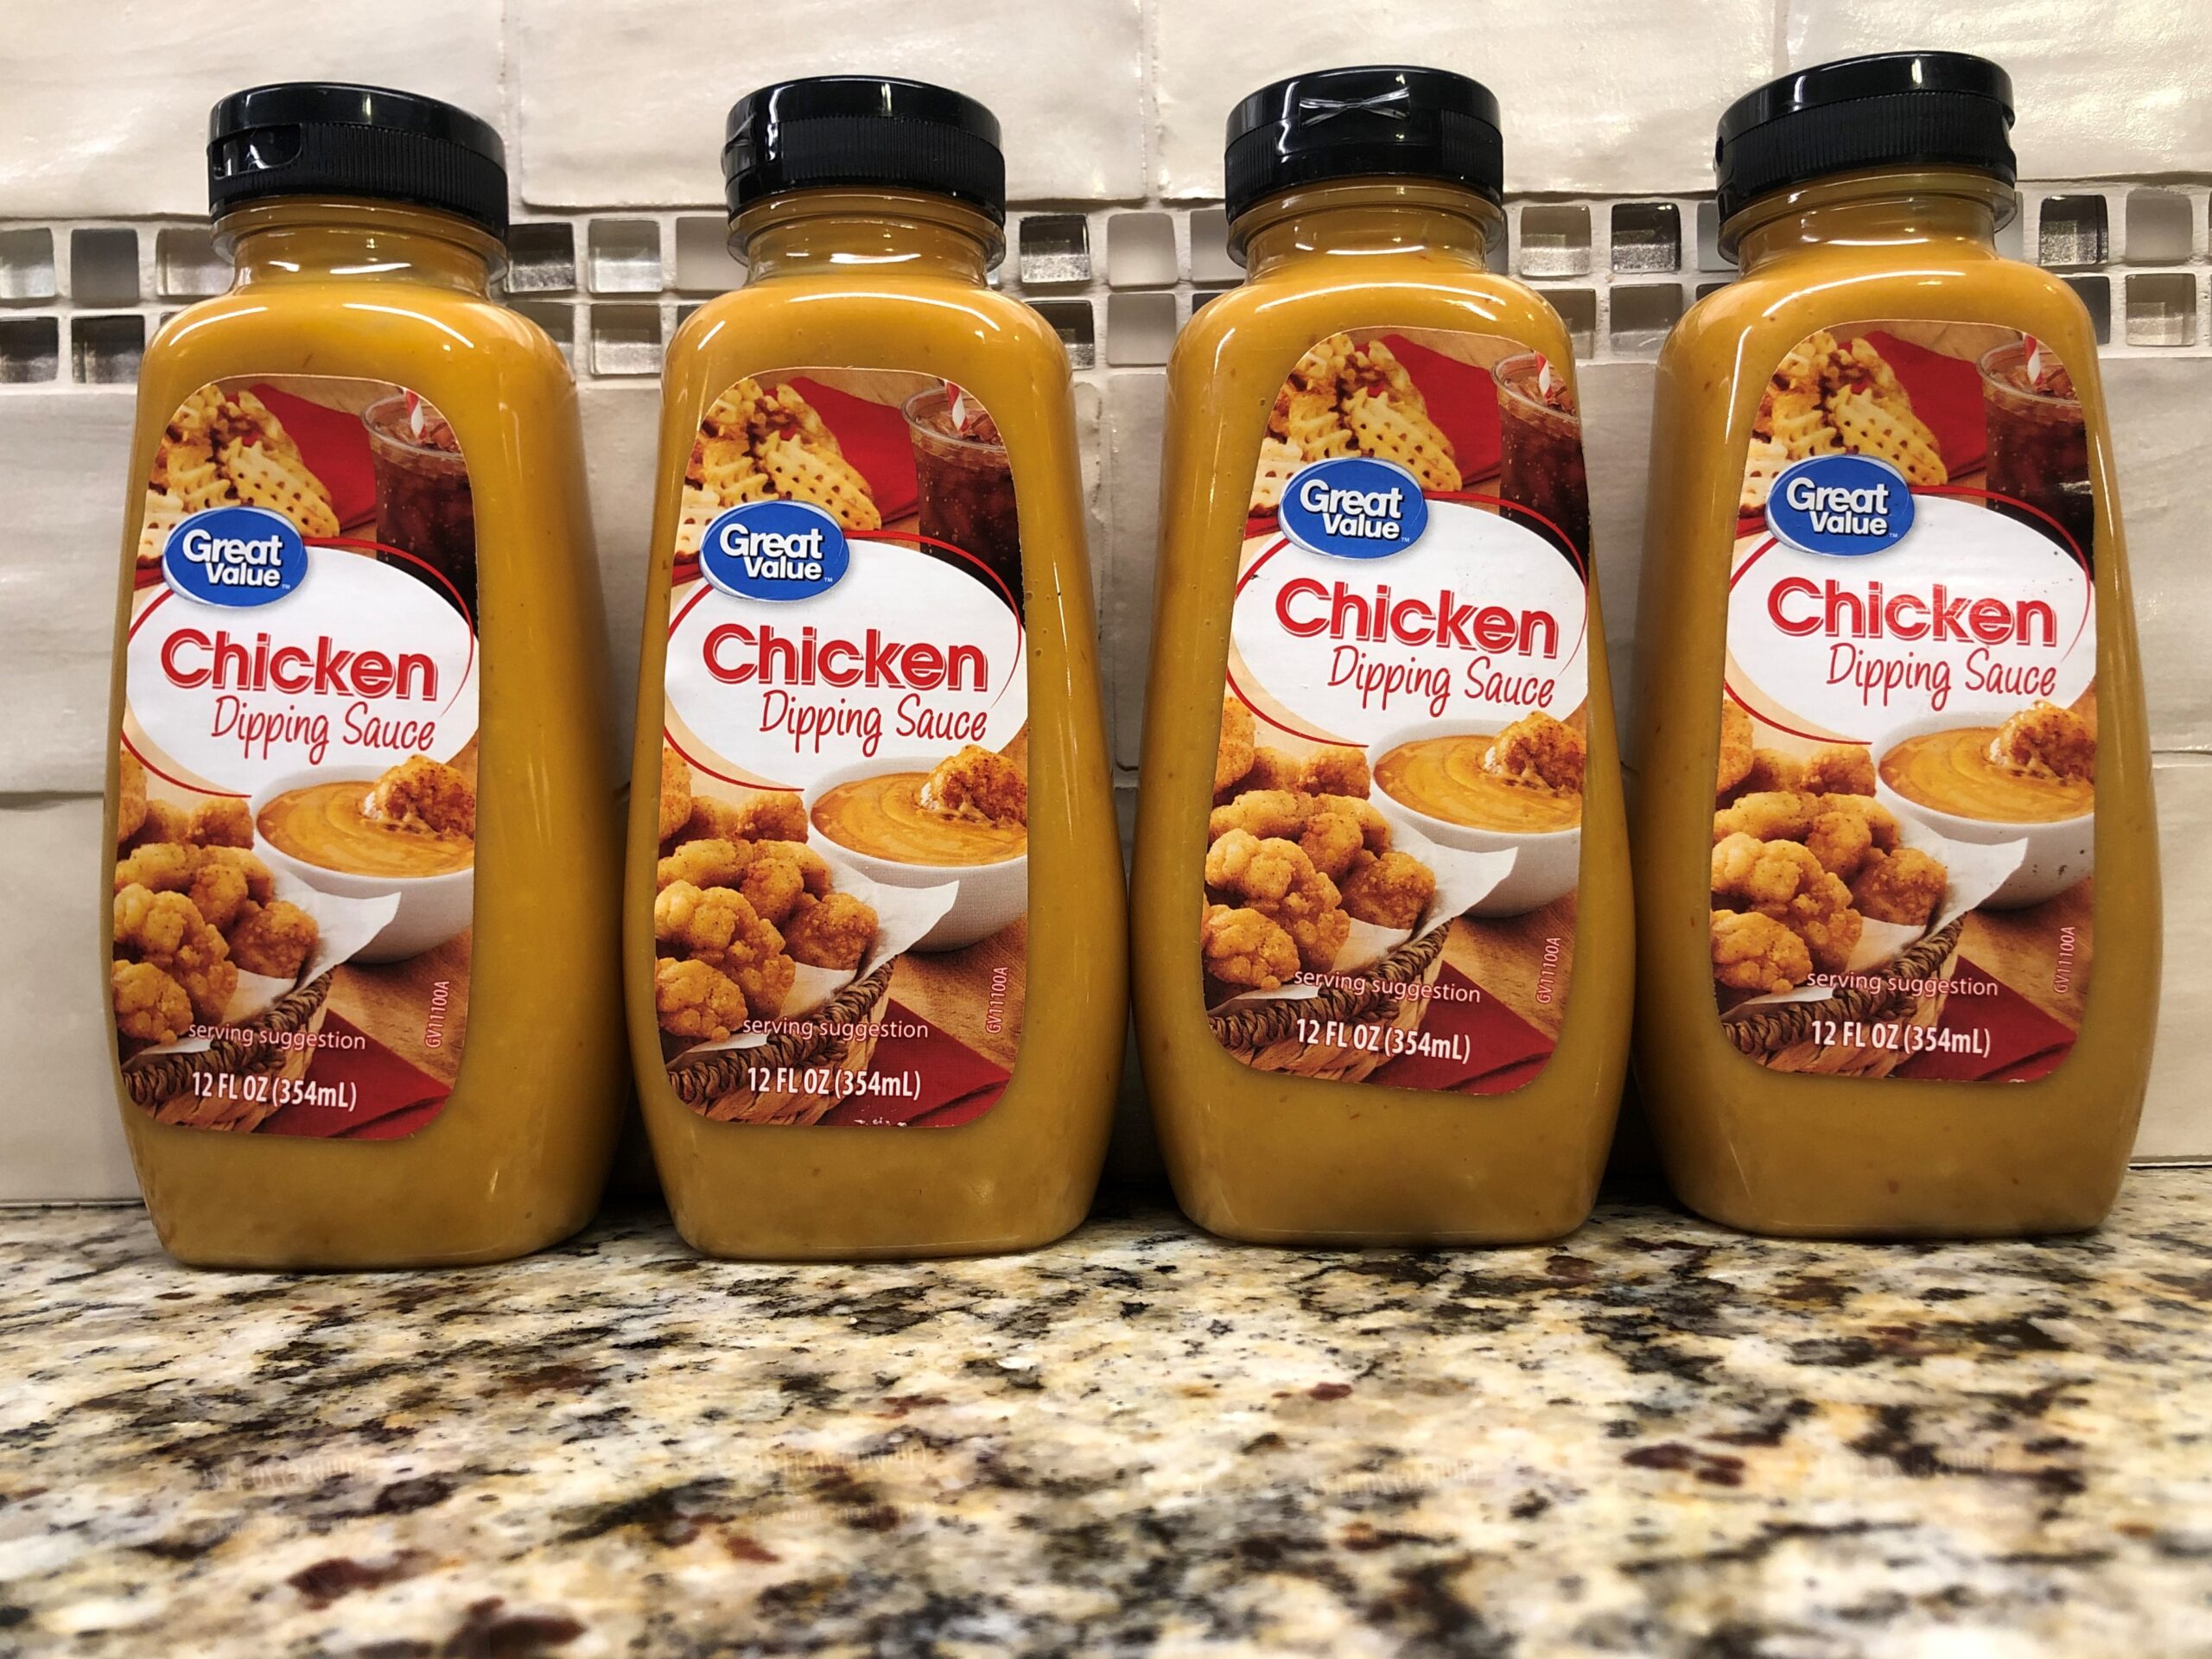 Walmart's Chicken Dipping Sauce Is A Total Chick-Fil-A Copycat